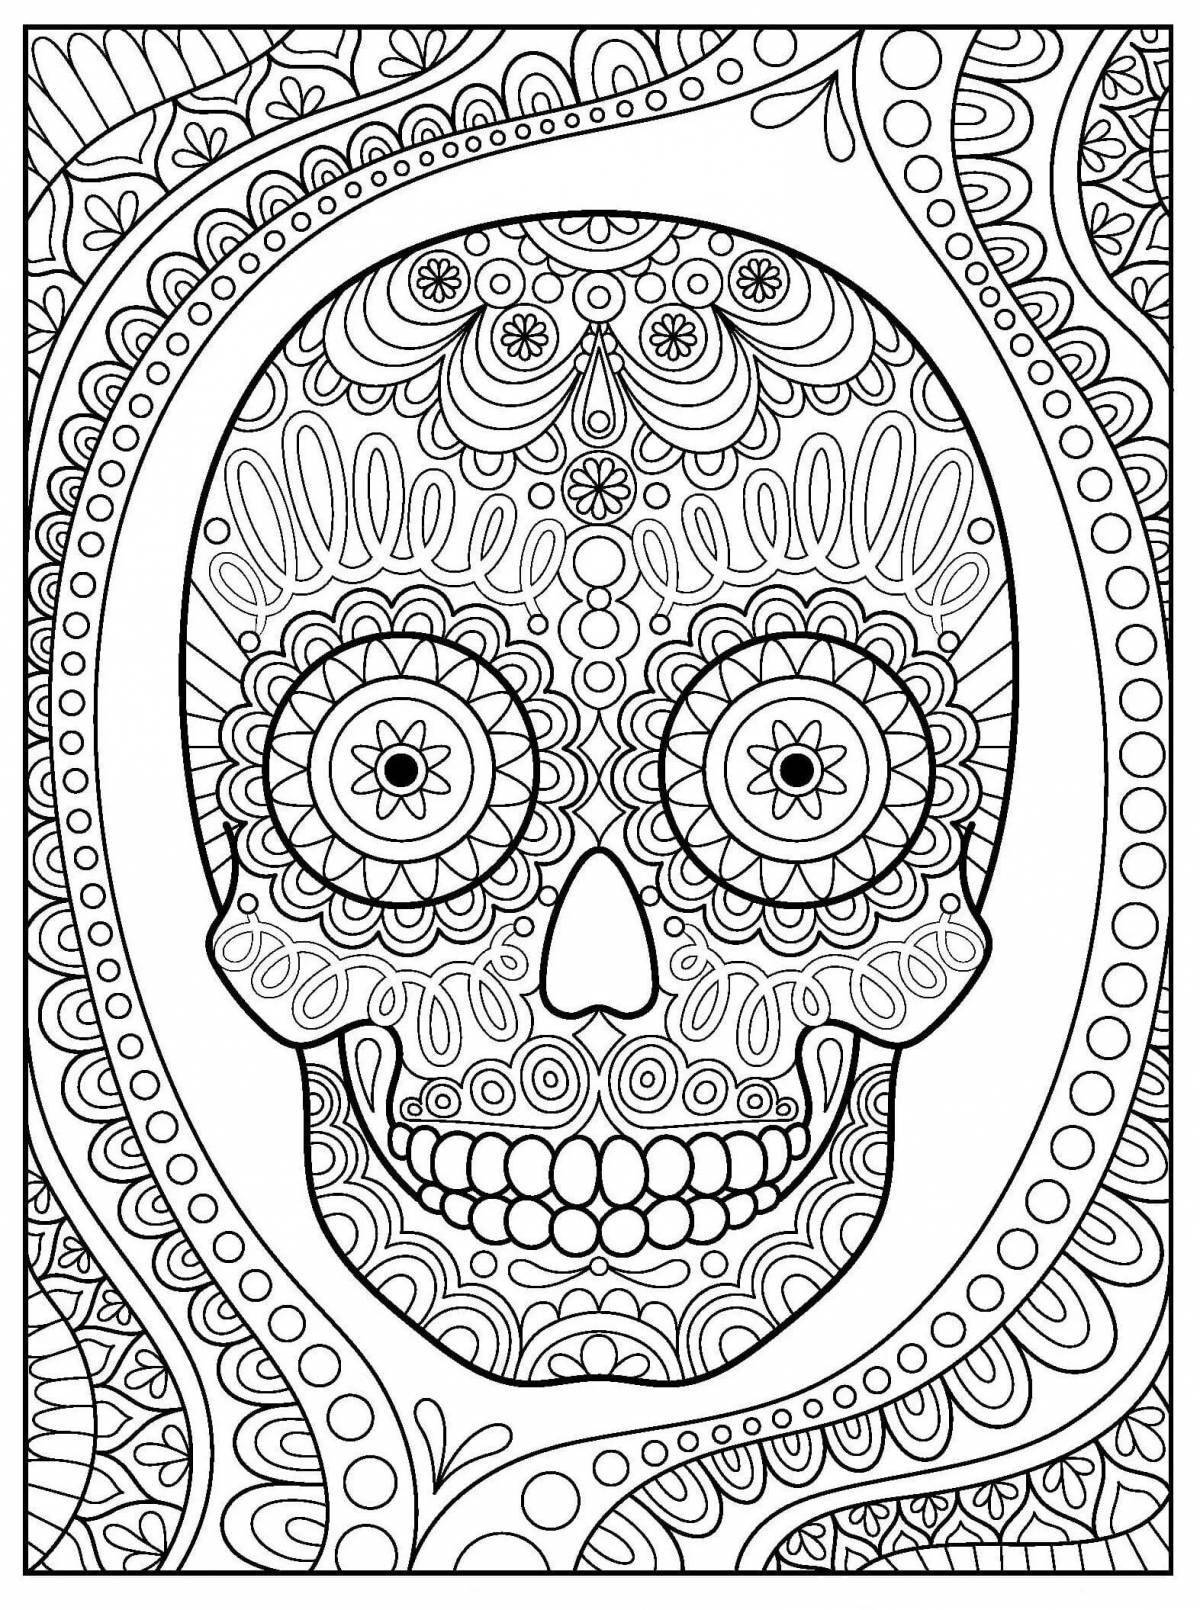 Cute anti-stress coloring book for adults